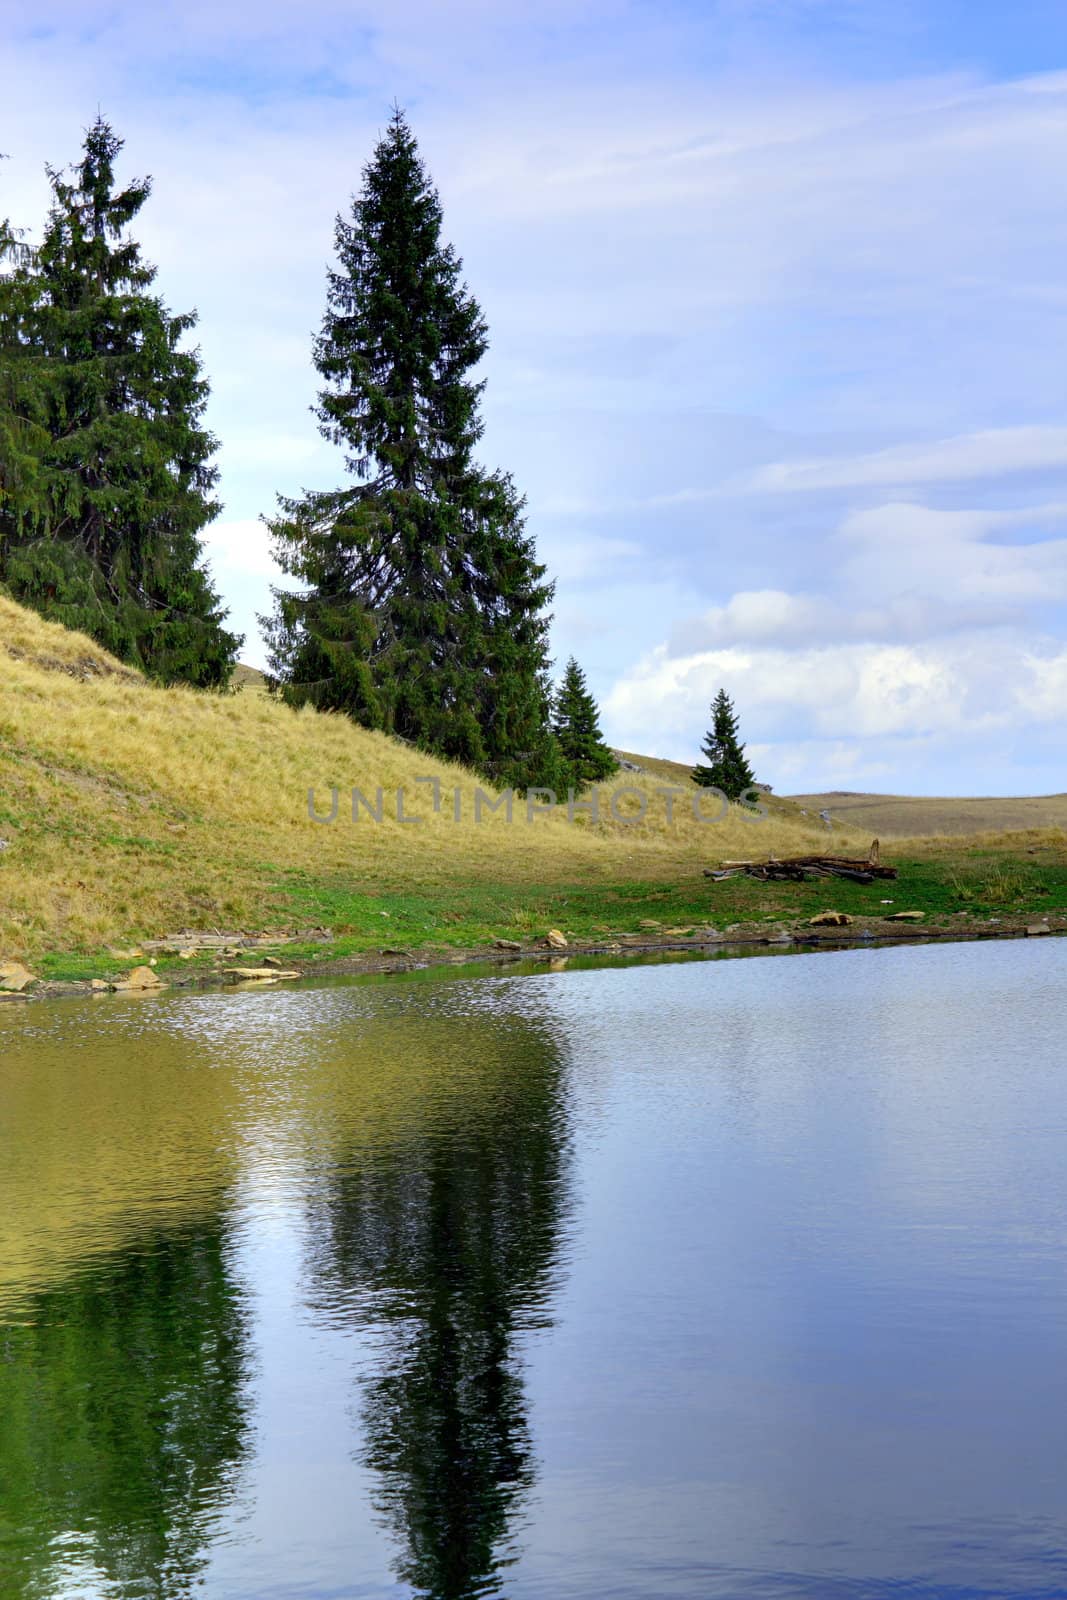 lake Icoana in Suhard mountains, Romania, surrounded by old spruces